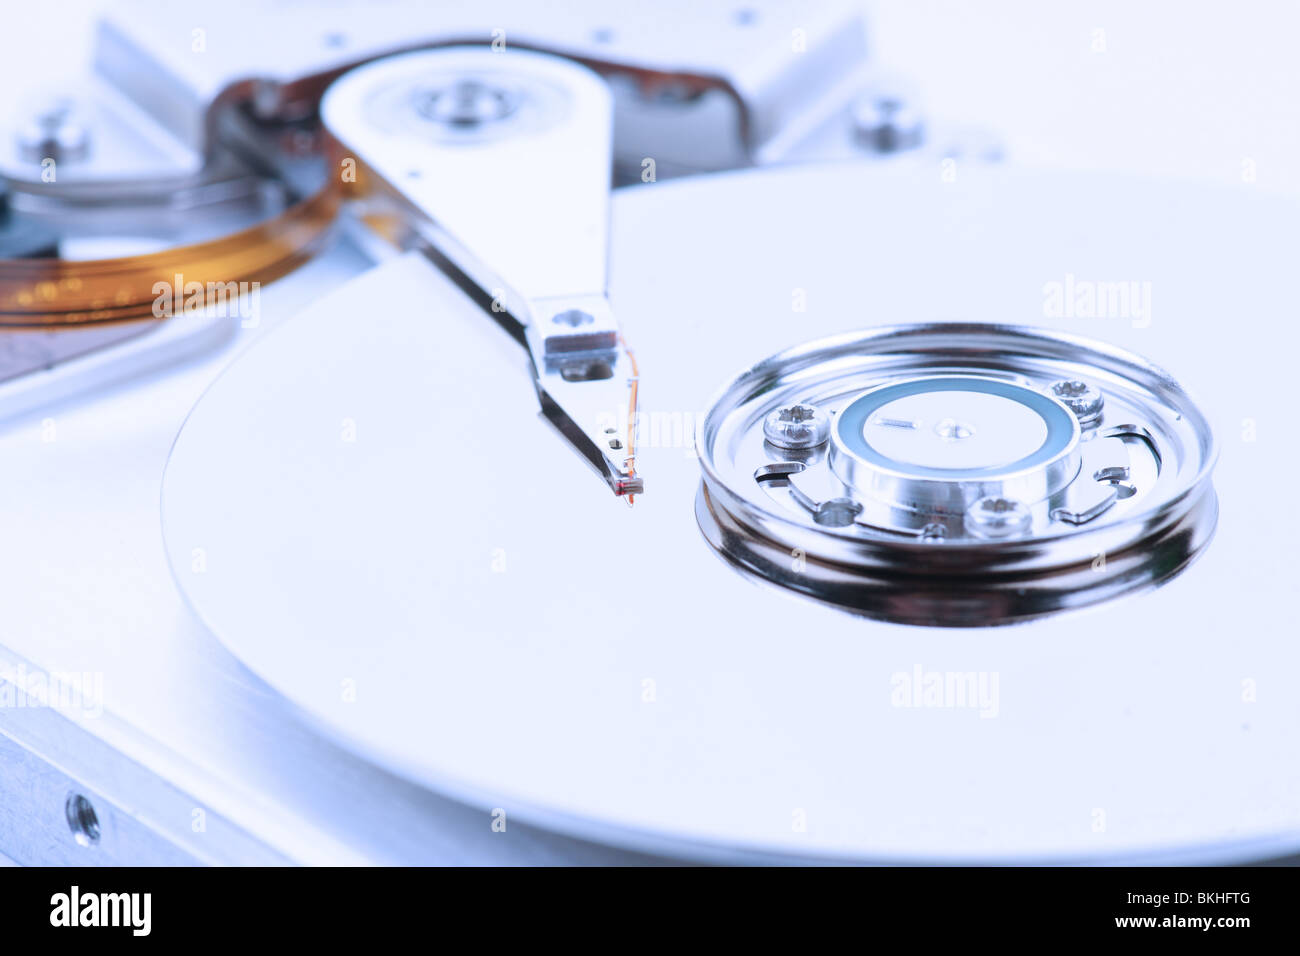 great image of a computer hard drive Stock Photo